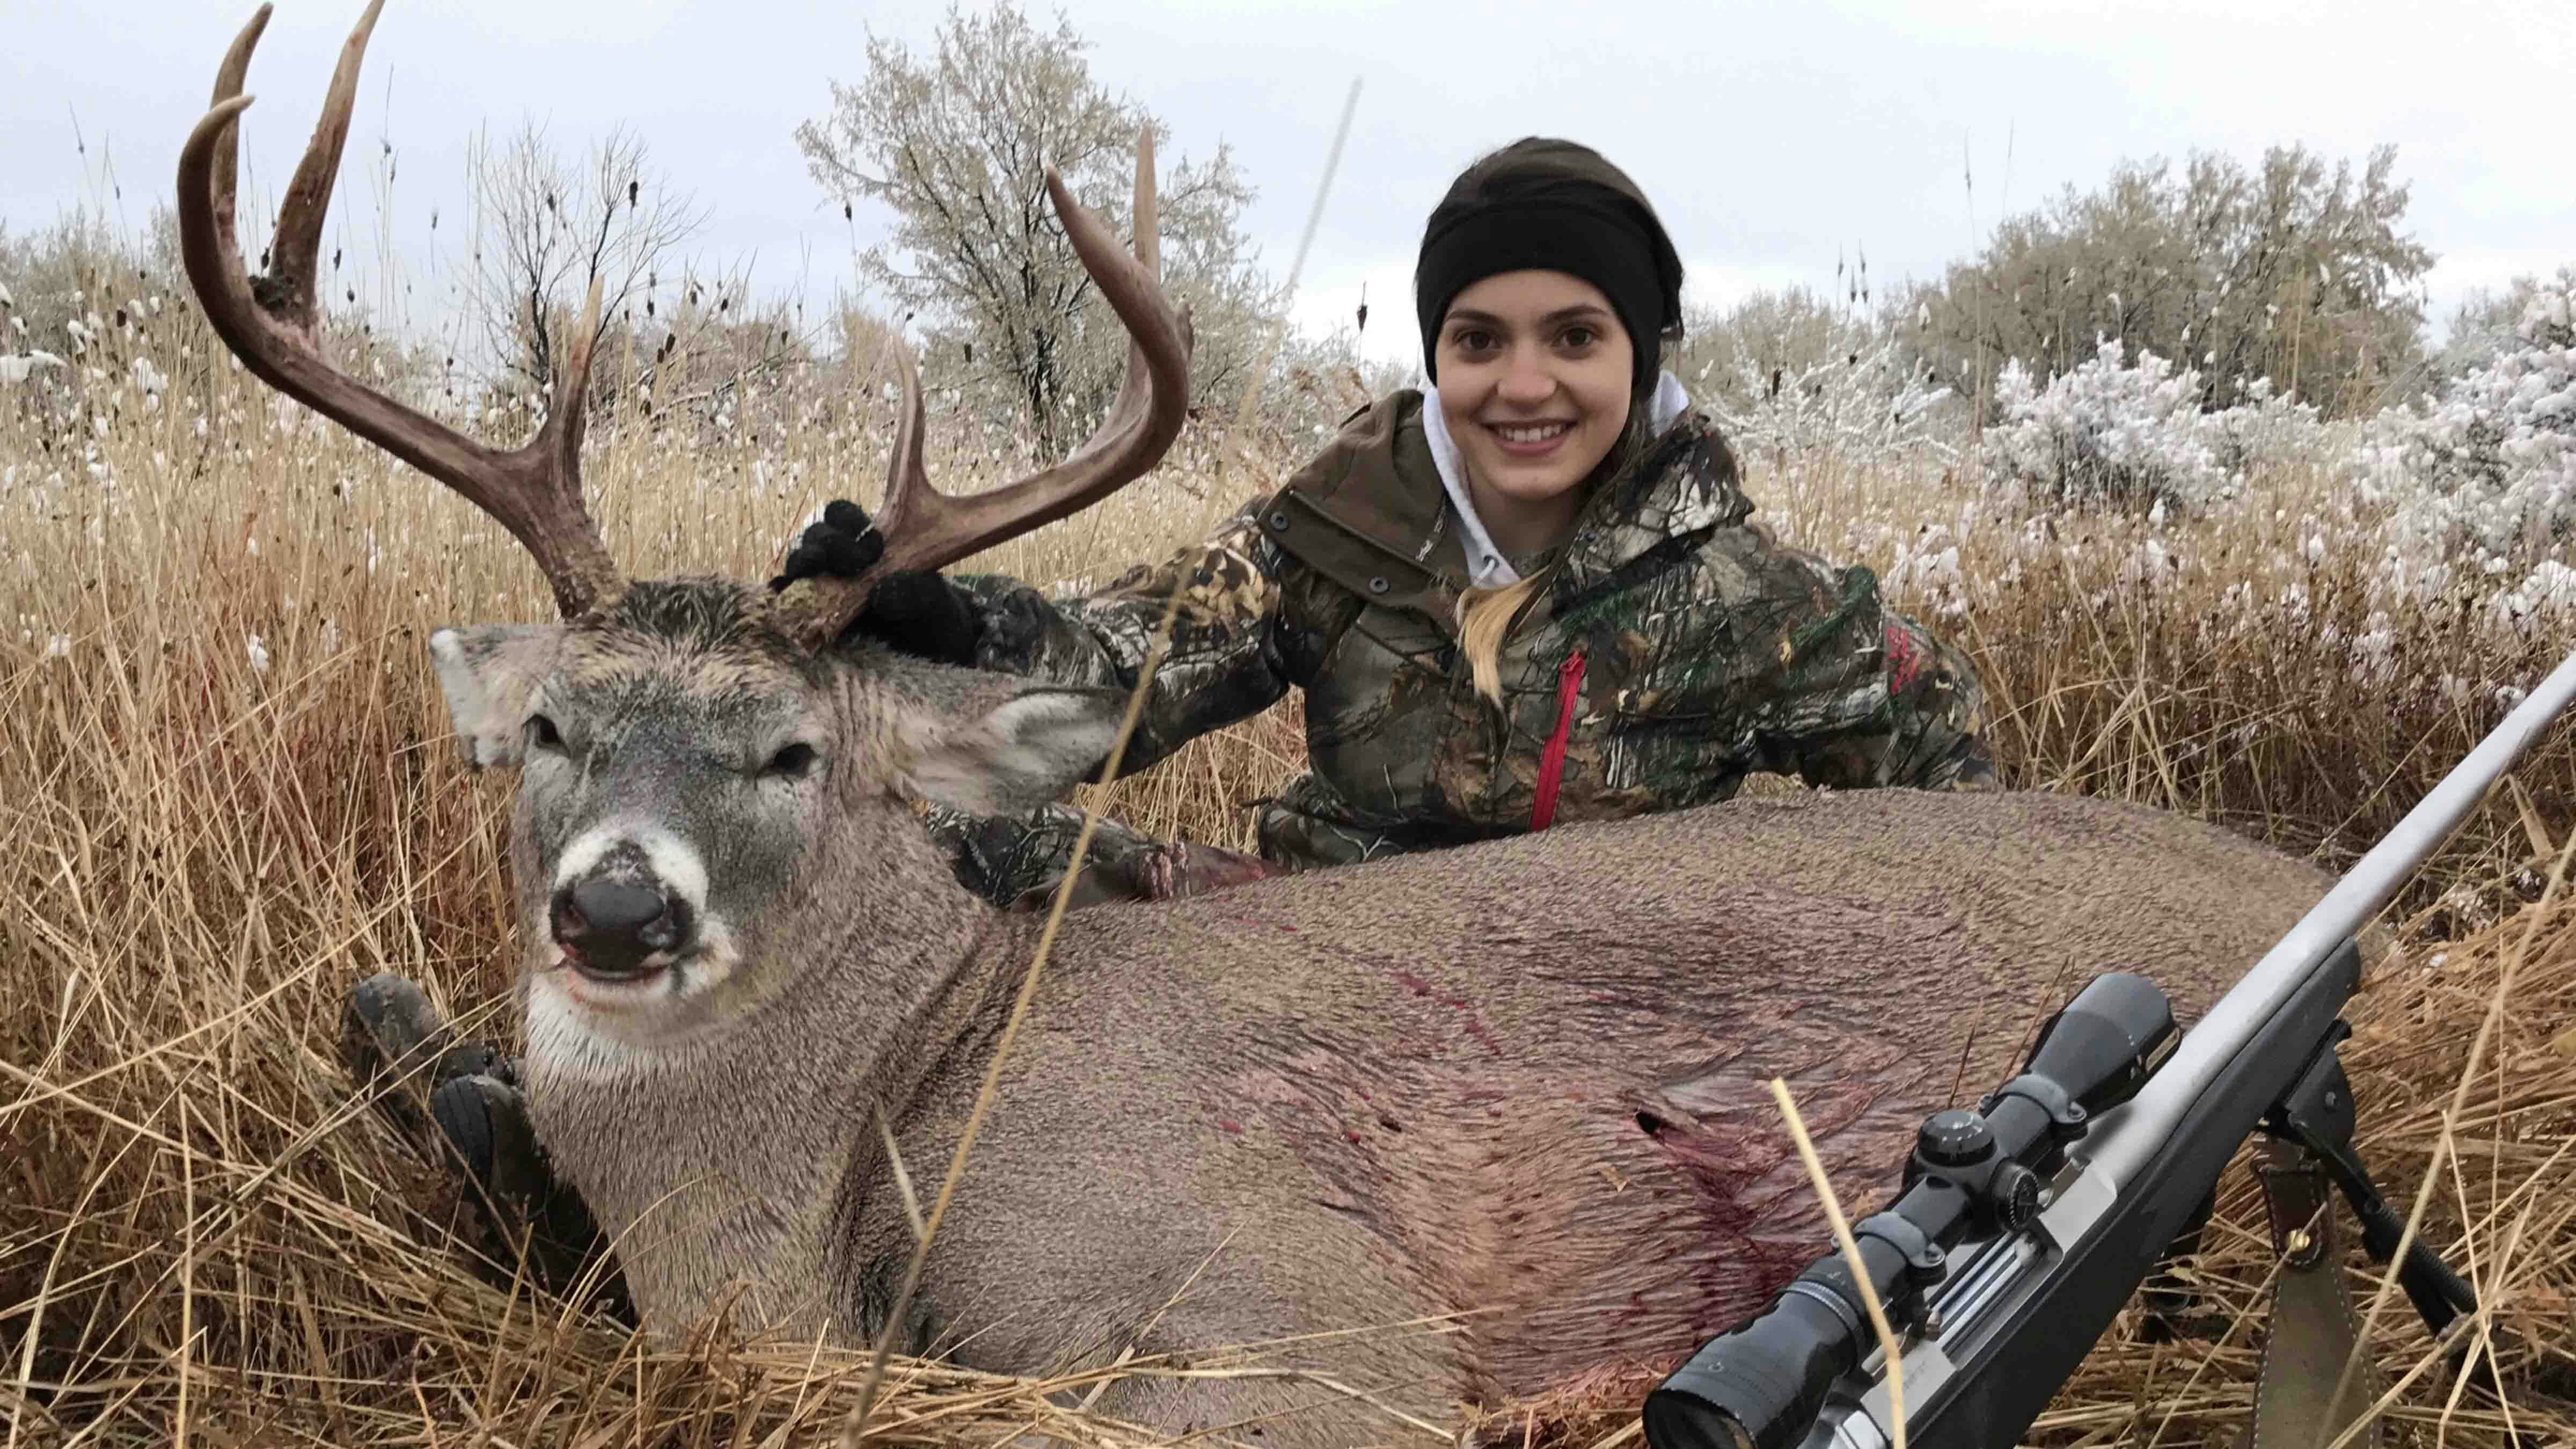 Brianne Siebert of Riverton has killed a few Wyoming whitetails, including this impressive buck near Powell.